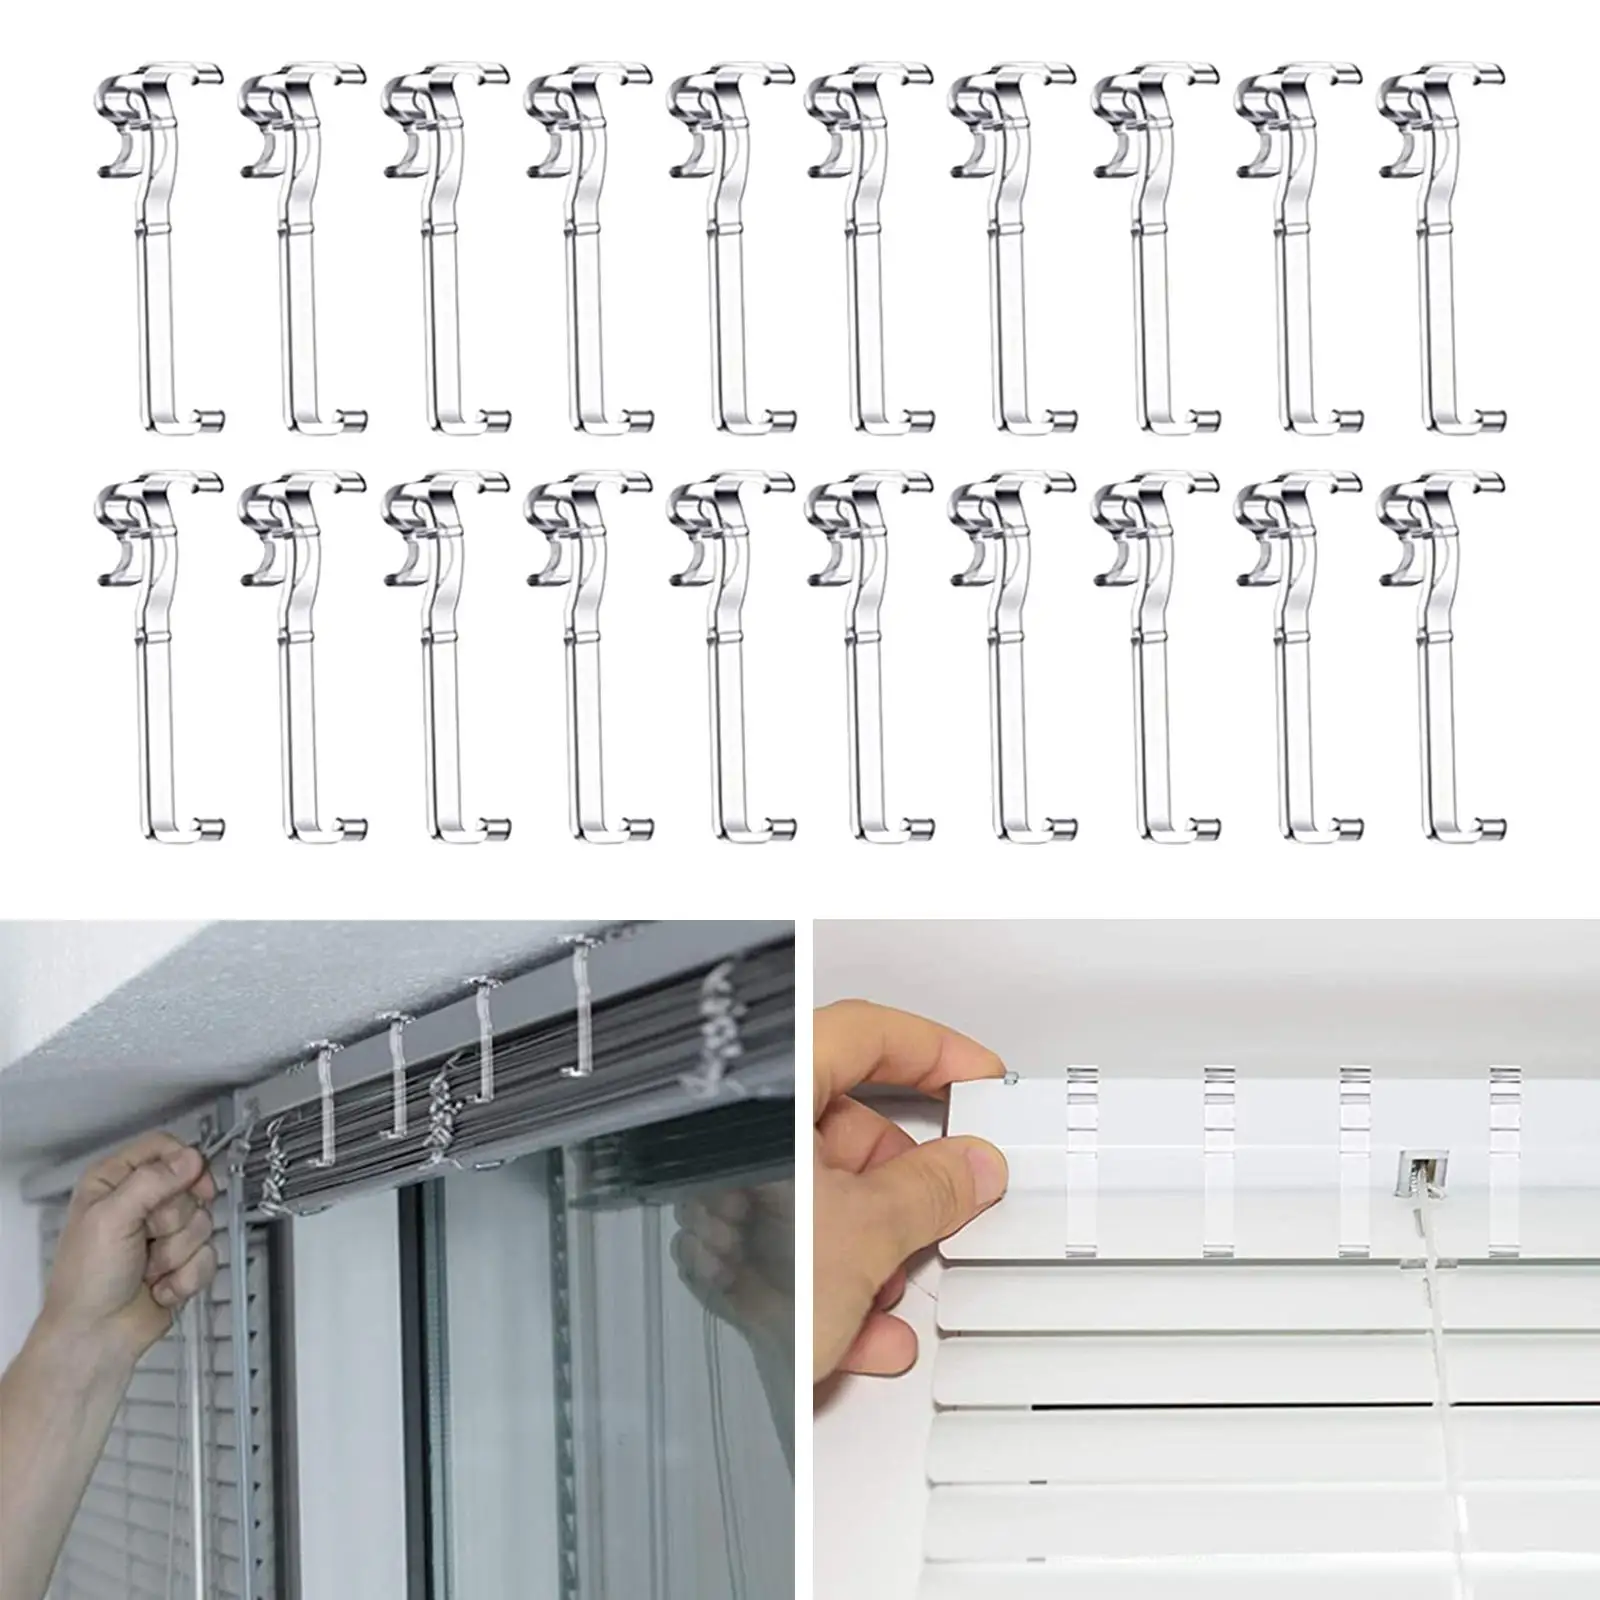 20 x Blind Clips Retainer Clip Holder Decorative Plastic Invisible Valance Clips for Blinds for Vertical Blinds Accessories Shop